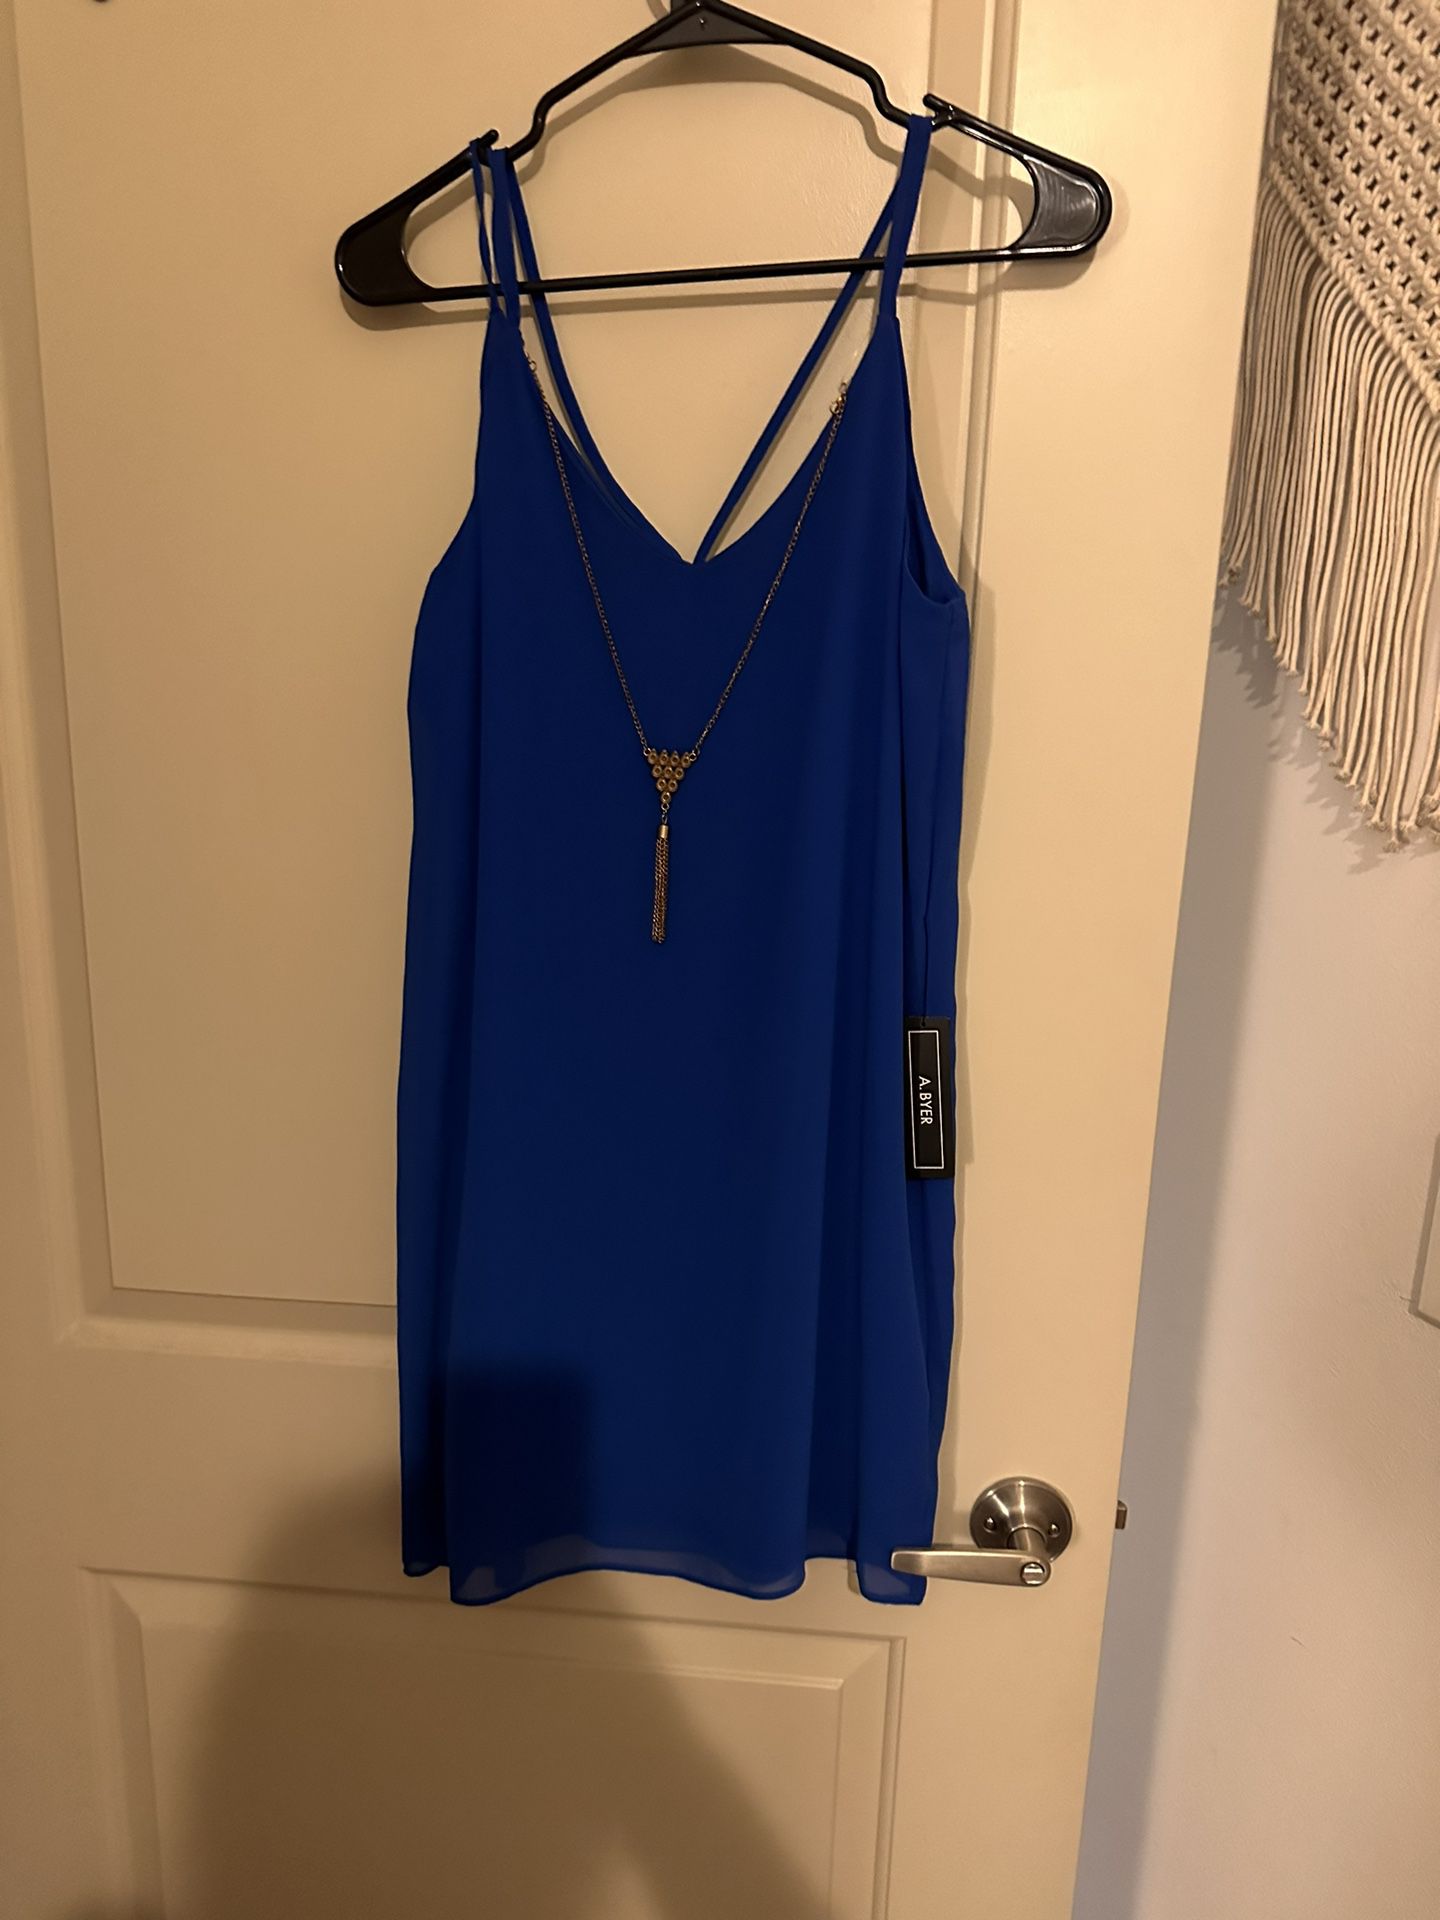 Brand New! Bright Blue Cocktail Dress With Chain